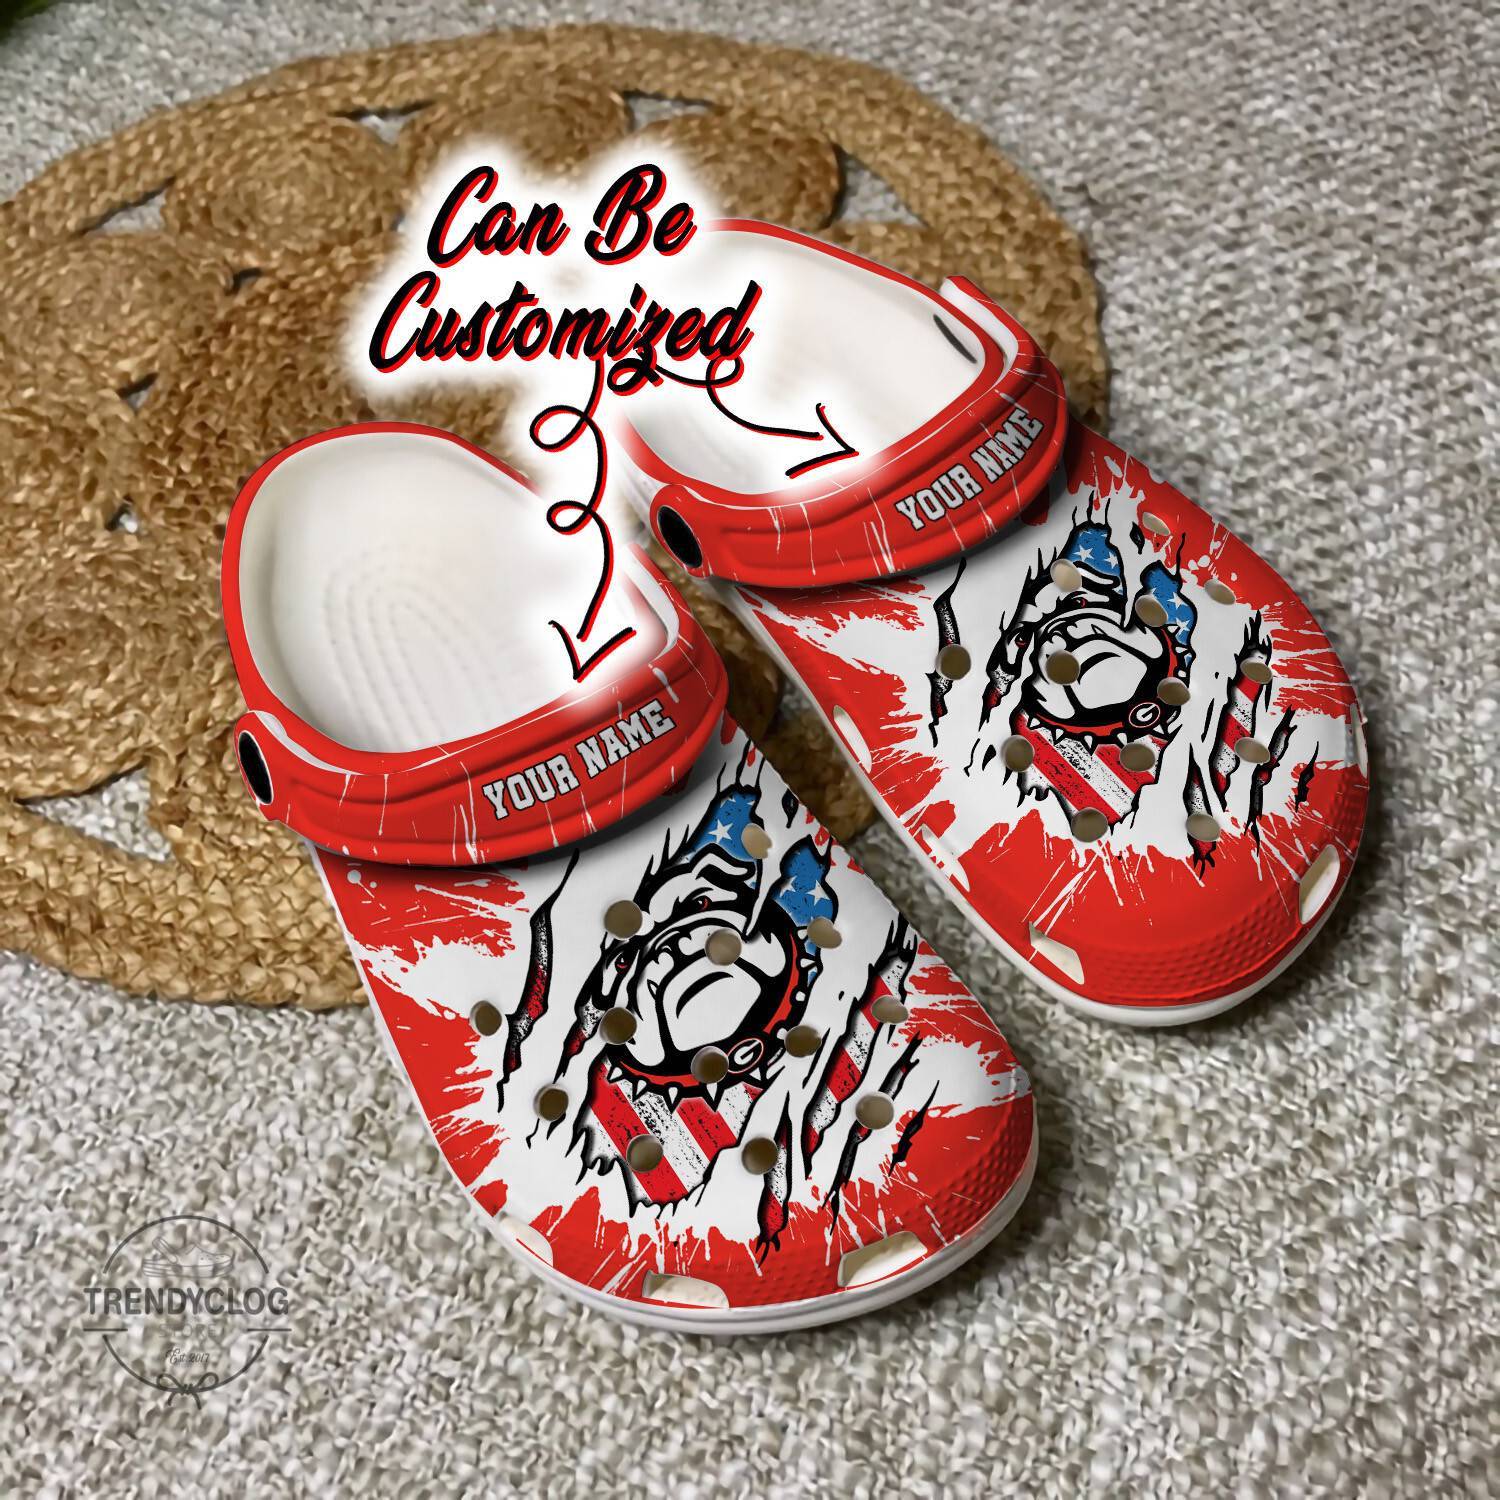 Sport Crocs Personalized GBulldogs University Ripped American Flag Clog Shoes